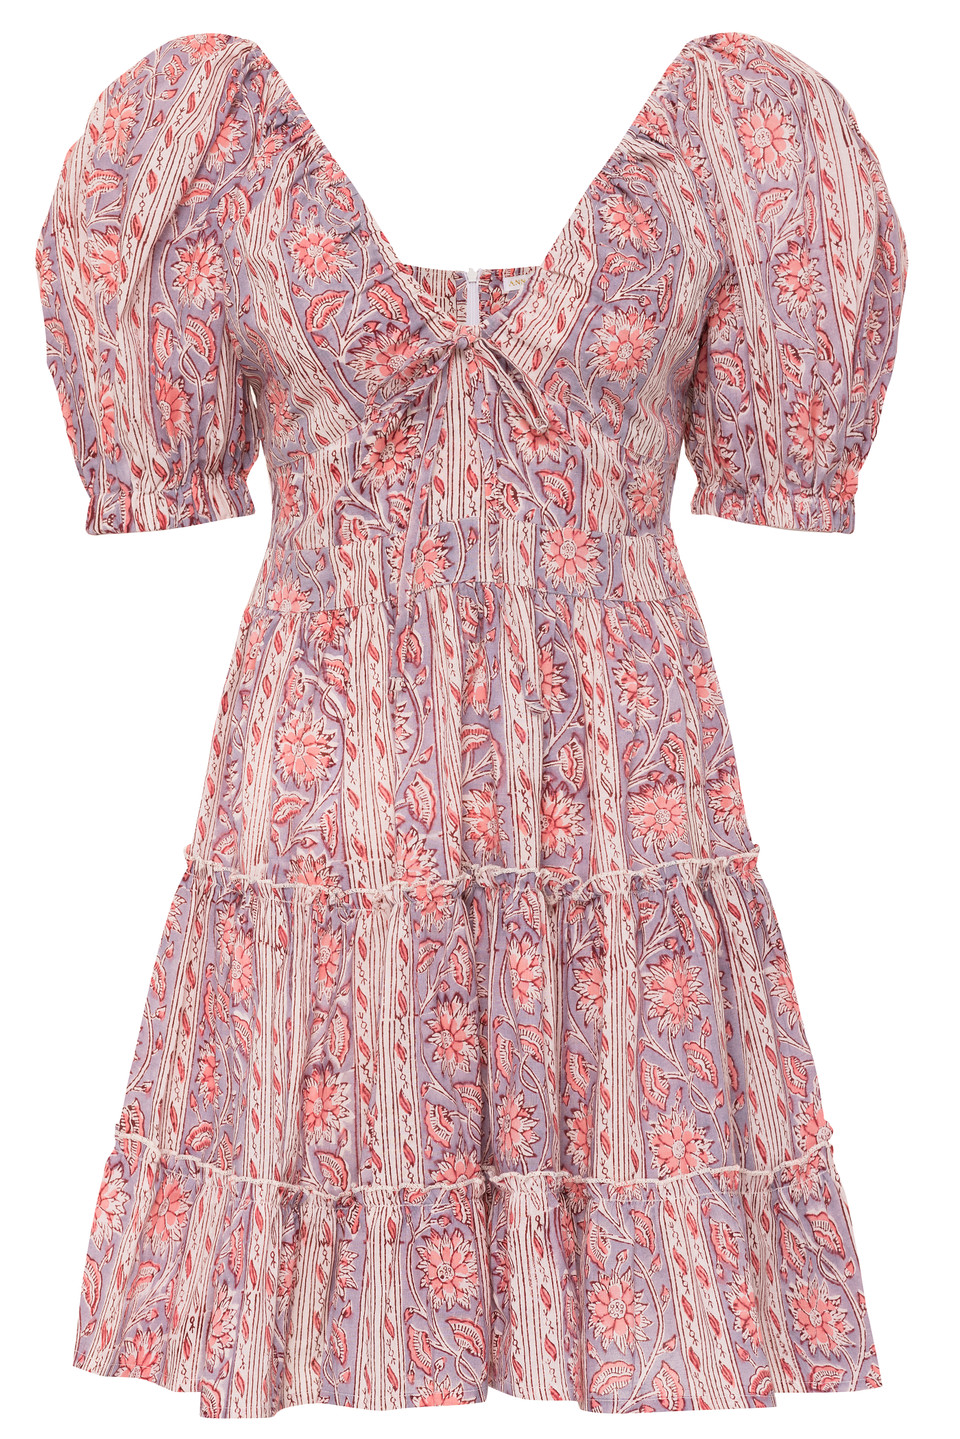 Anna Cate Adeline Dress, Lilac Pink - Monkee's of Mount Pleasant